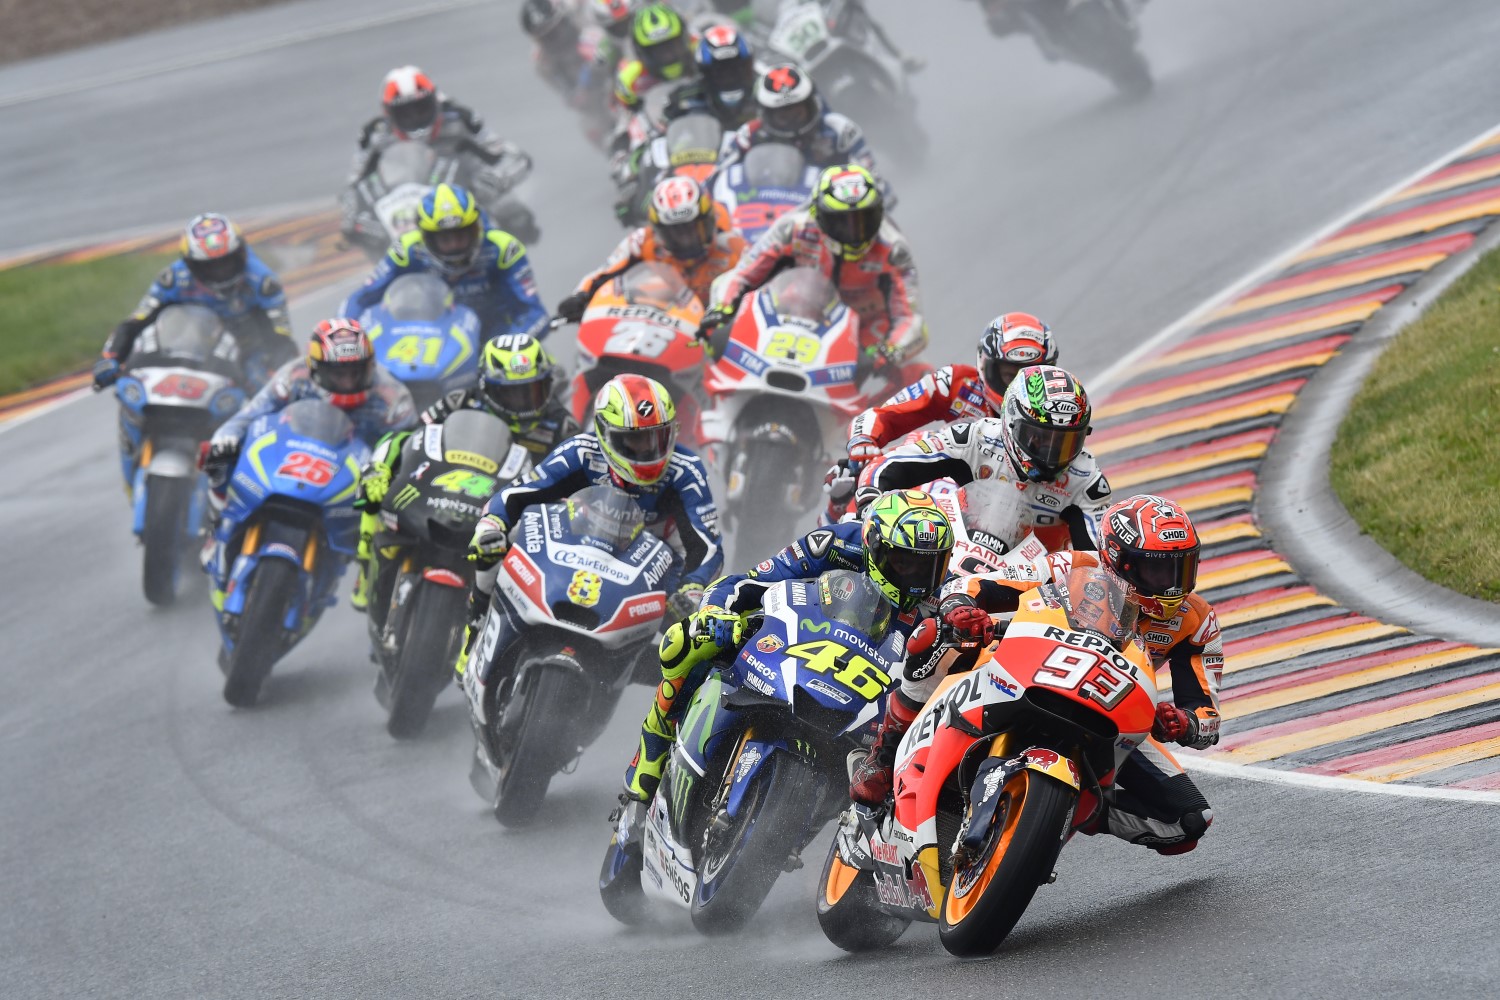 Marquez leads at wet start